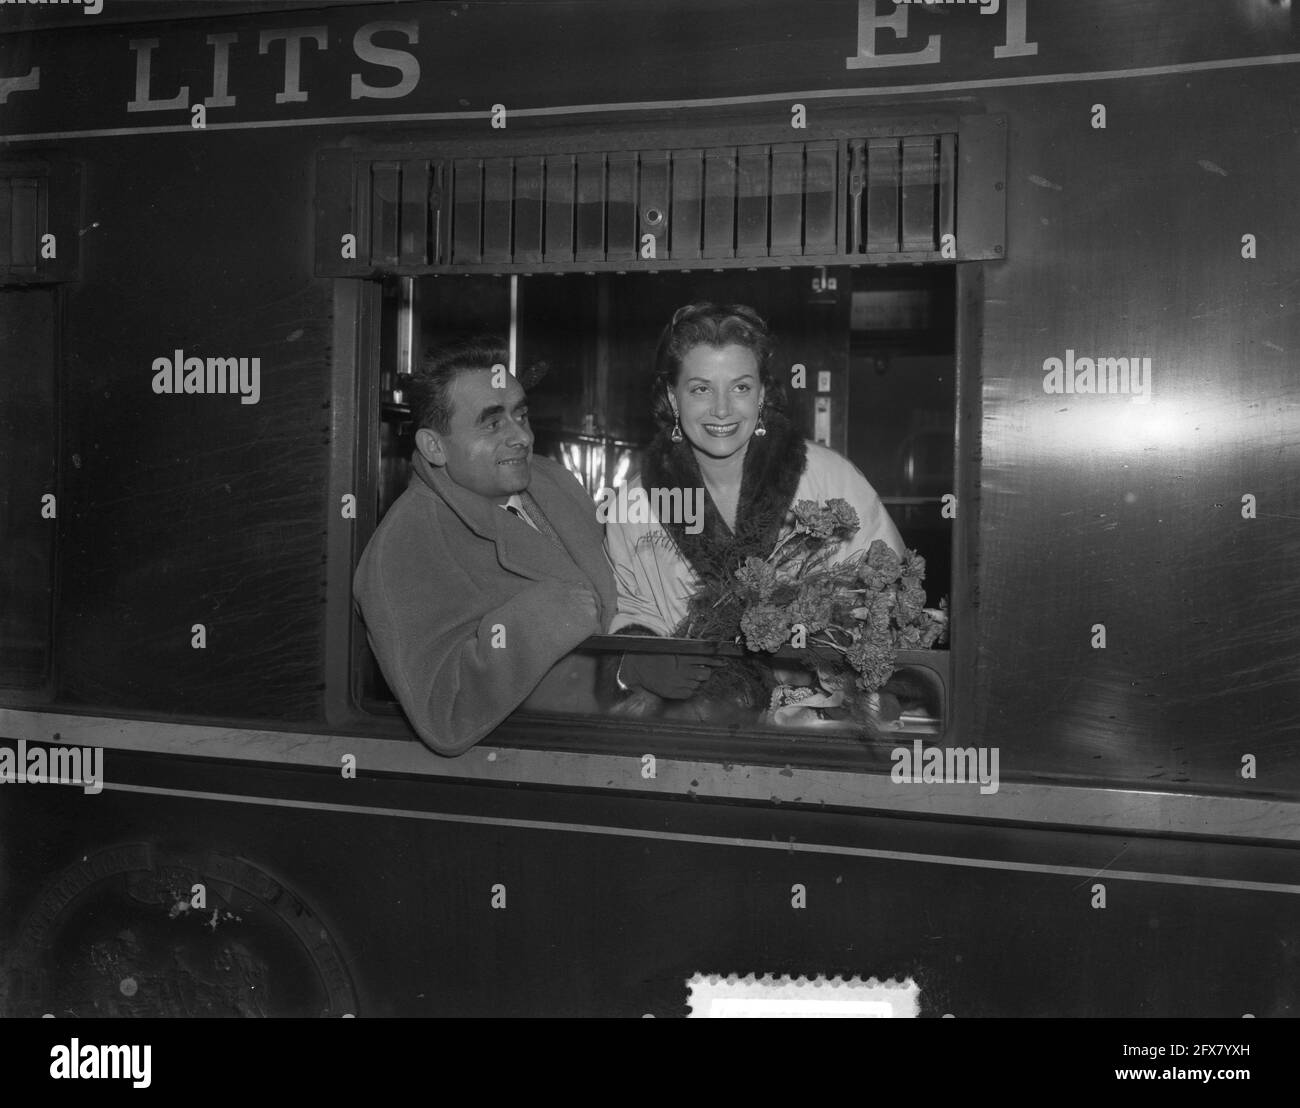 Arrival at Central Station of Henri George Clouzot with his wife Vera, November 18, 1953, actresses, film directors, railroads, stations, The Netherlands, 20th century press agency photo, news to remember, documentary, historic photography 1945-1990, visual stories, human history of the Twentieth Century, capturing moments in time Stock Photo